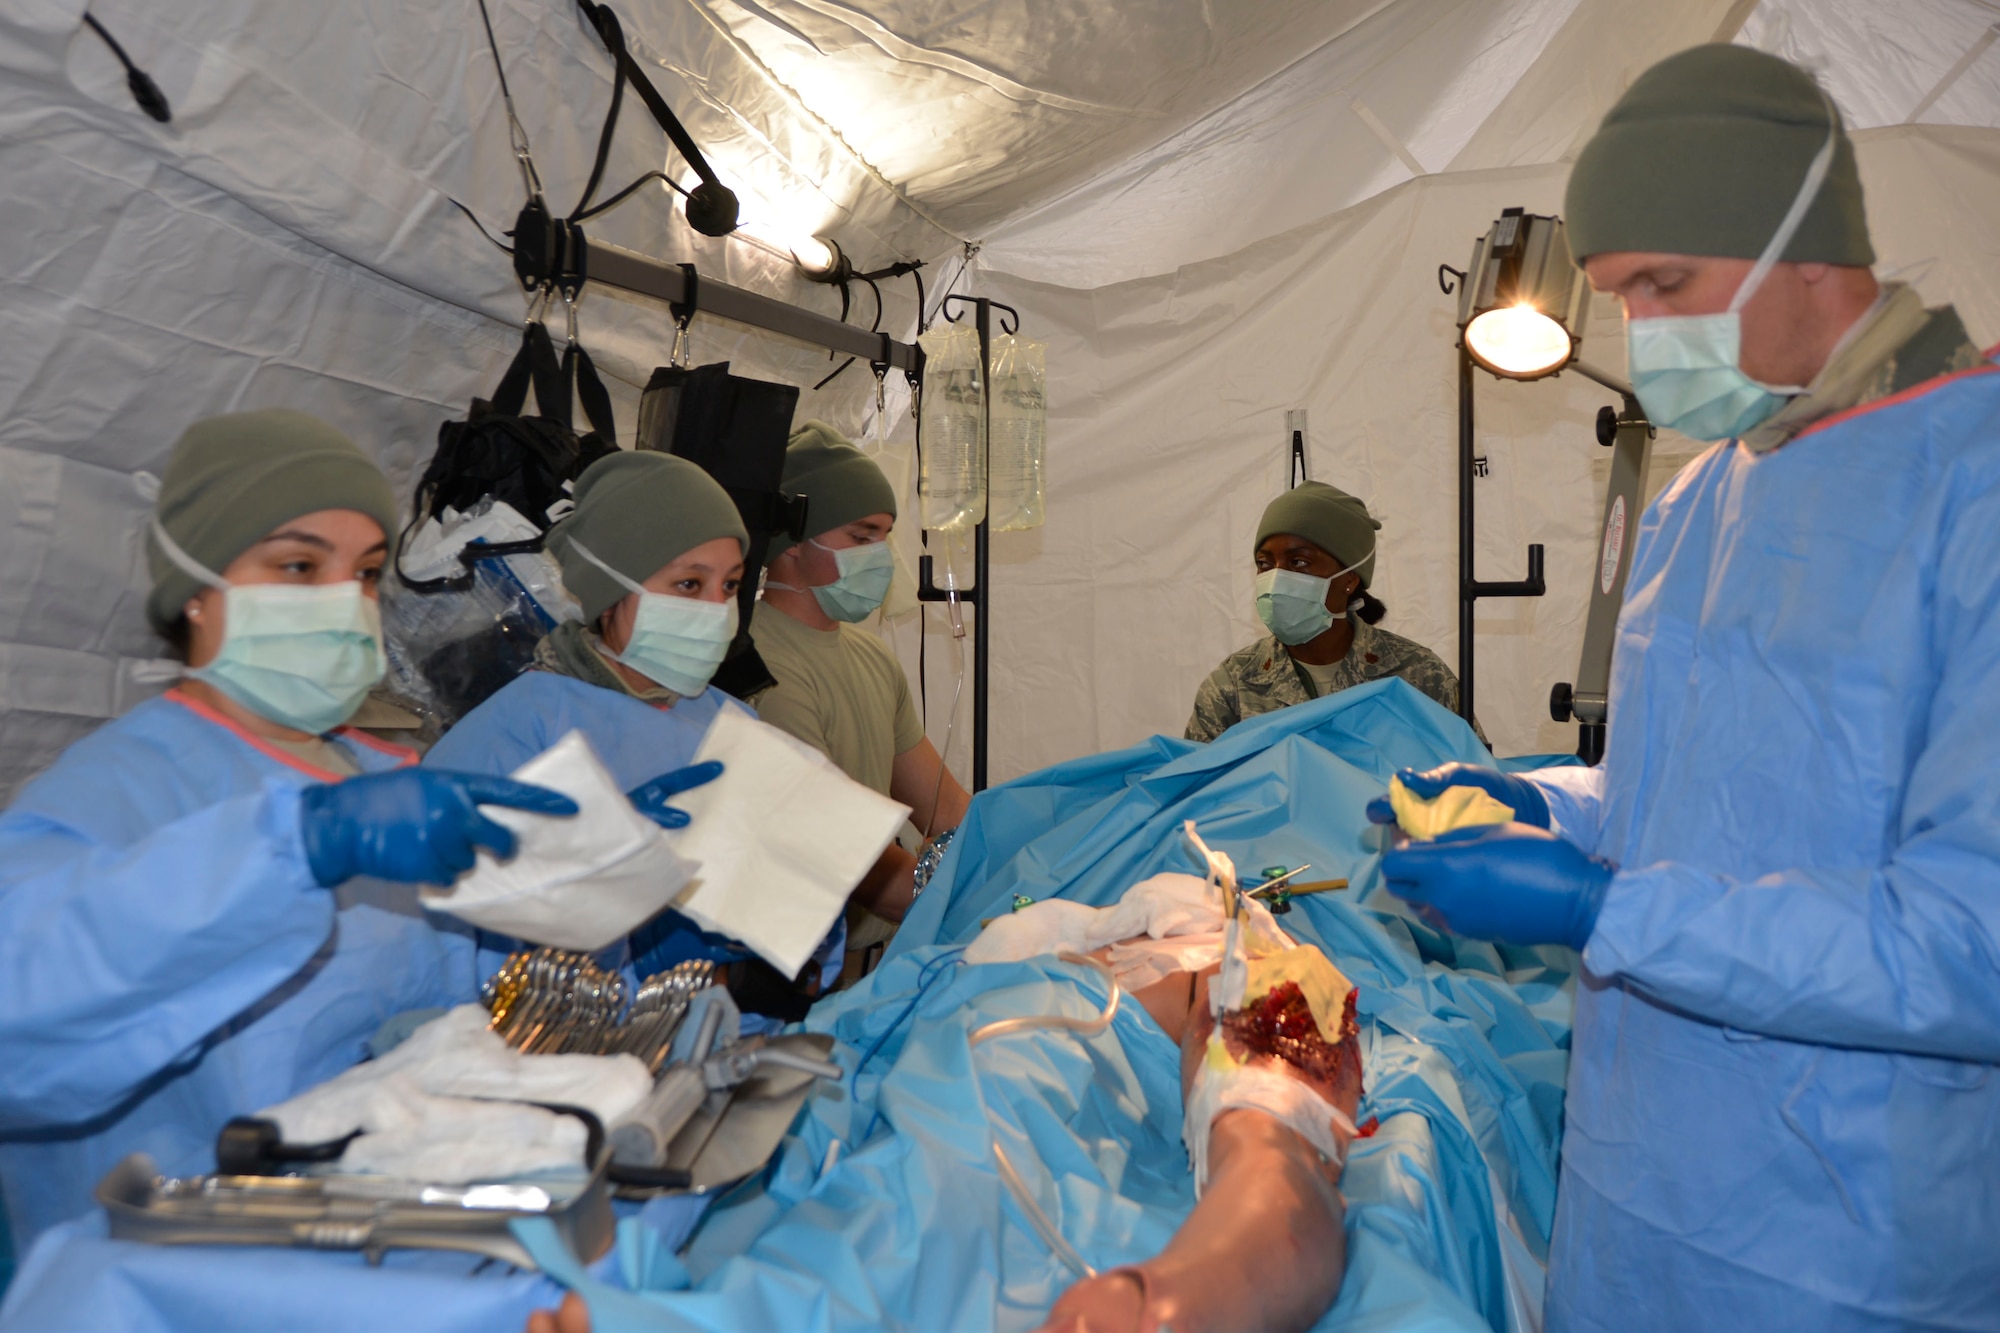 Staff Sgt. Luiza Pereira, surgical technician, 81st Medical Group, Keesler Air Force Base, Miss., hands a gauze dressing to Maj. (Dr.) T. David Tarity, 81st MDG, during an emergency surgery procedure on a natural disaster tornado scenario victim. The procedure was part of the ongoing Expeditionary Medical Support field confirmation exercise here April 18. The confirmation exercise is evaluating the tactics, techniques and procedures of EMEDS operations during a domestic U.S. contingency such as a natural disaster. (Air Force photo by Mary McHale)